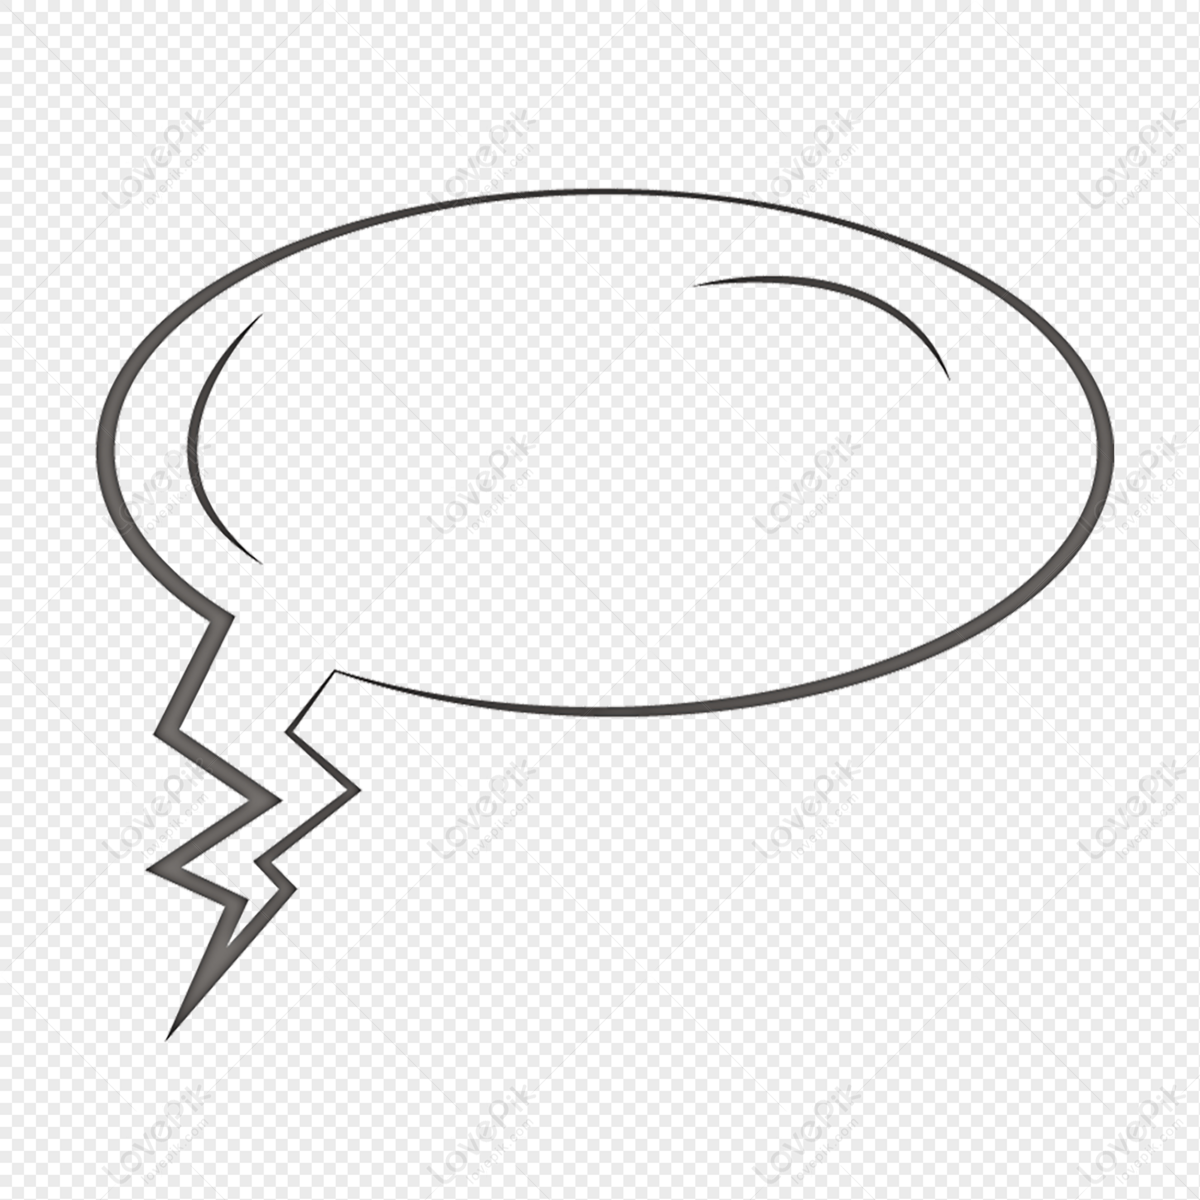 thought bubble vector free download